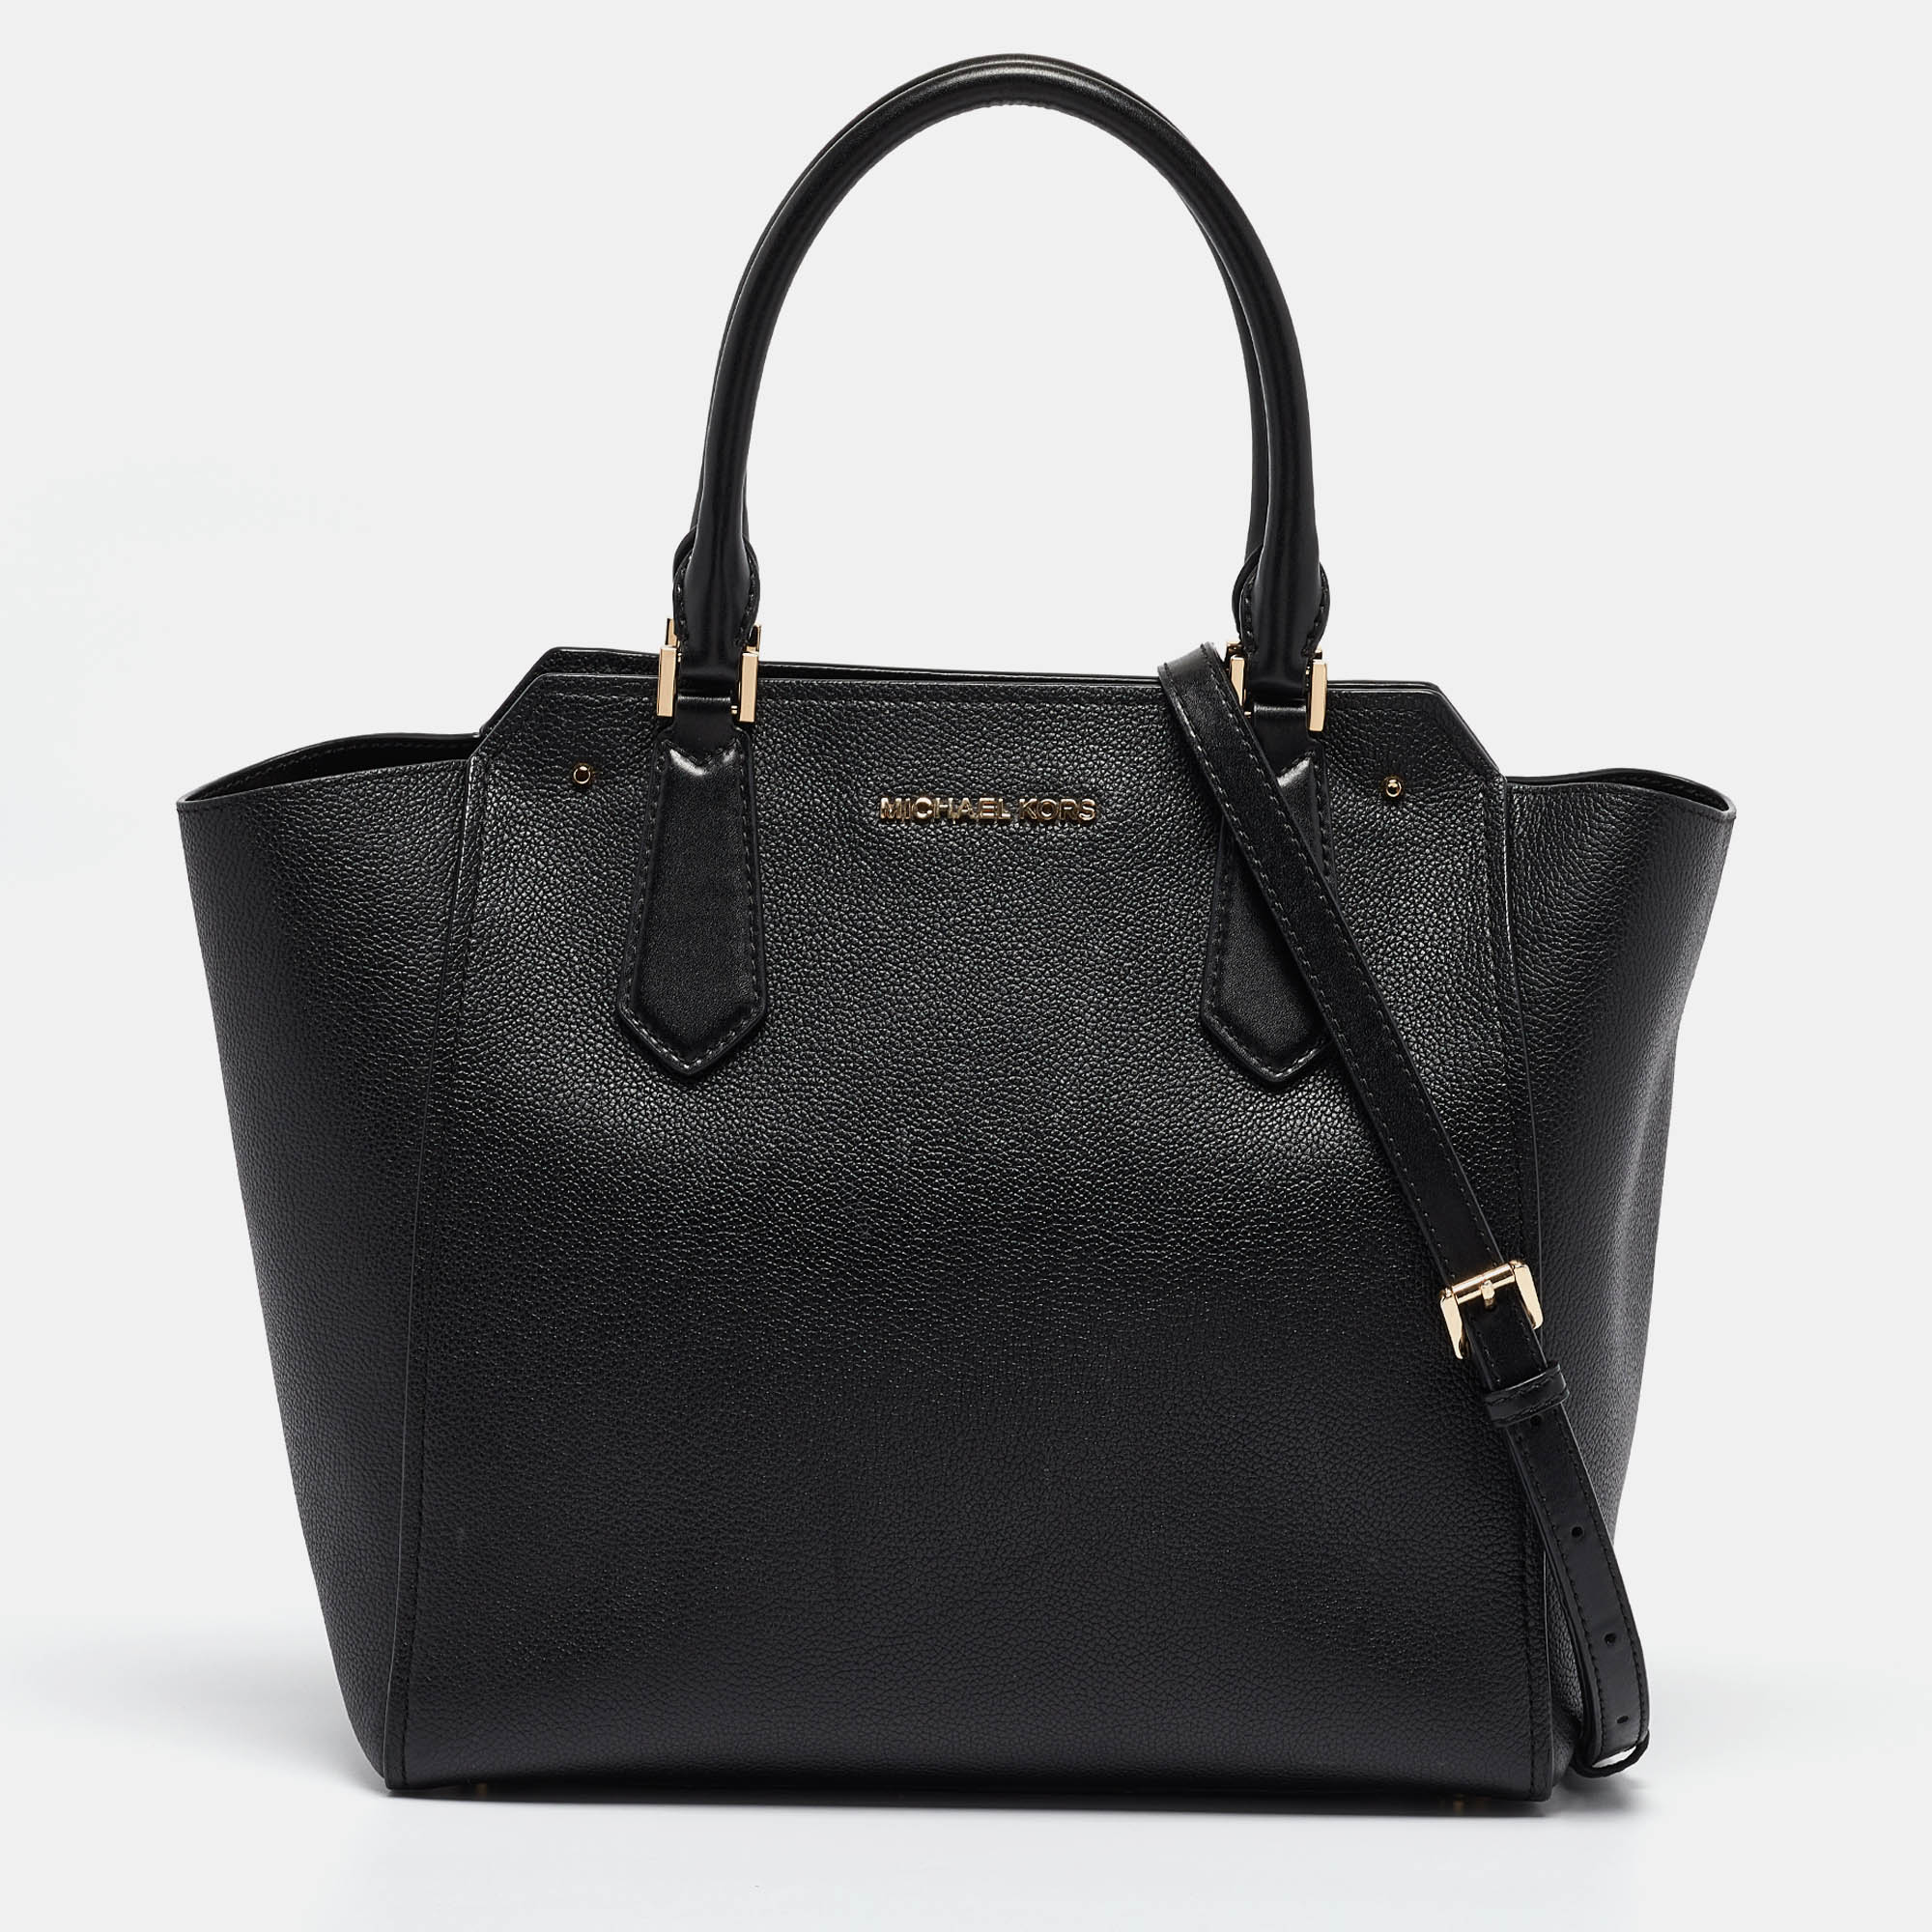 Pre-owned Michael Kors Black Leather Hayes Tote